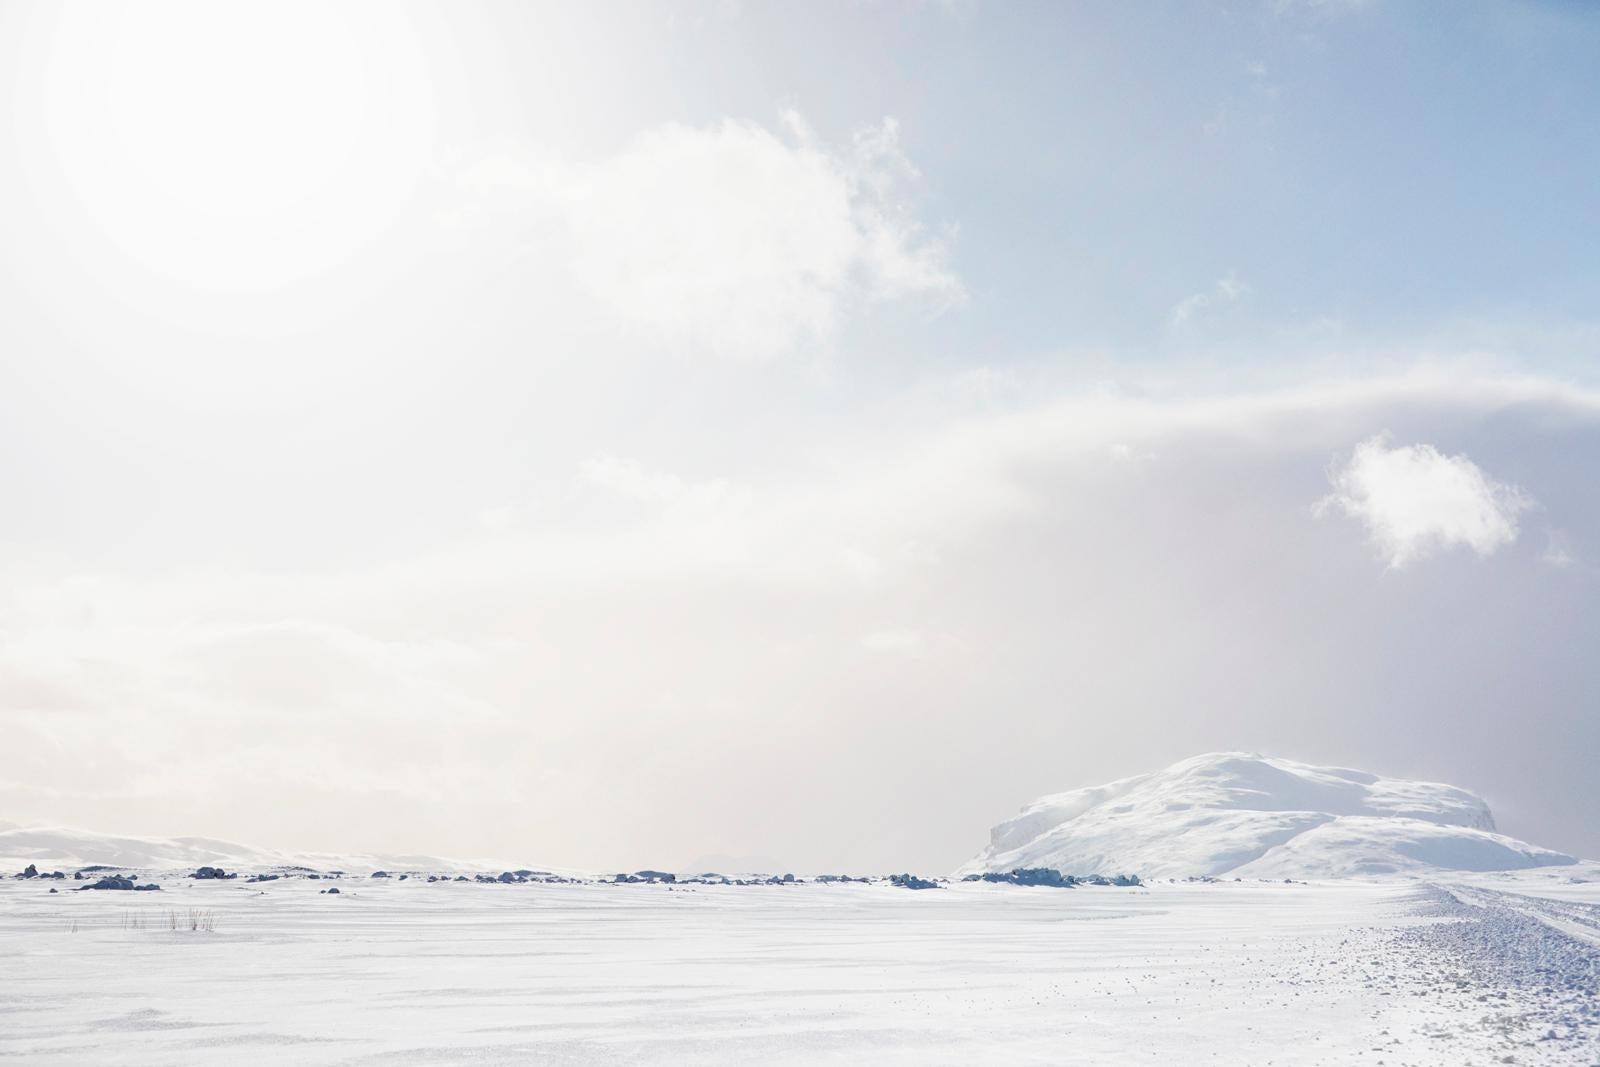 Drew Doggett Landscape Photograph - An epic, dream-like snowy tundra in Iceland hit by the sun